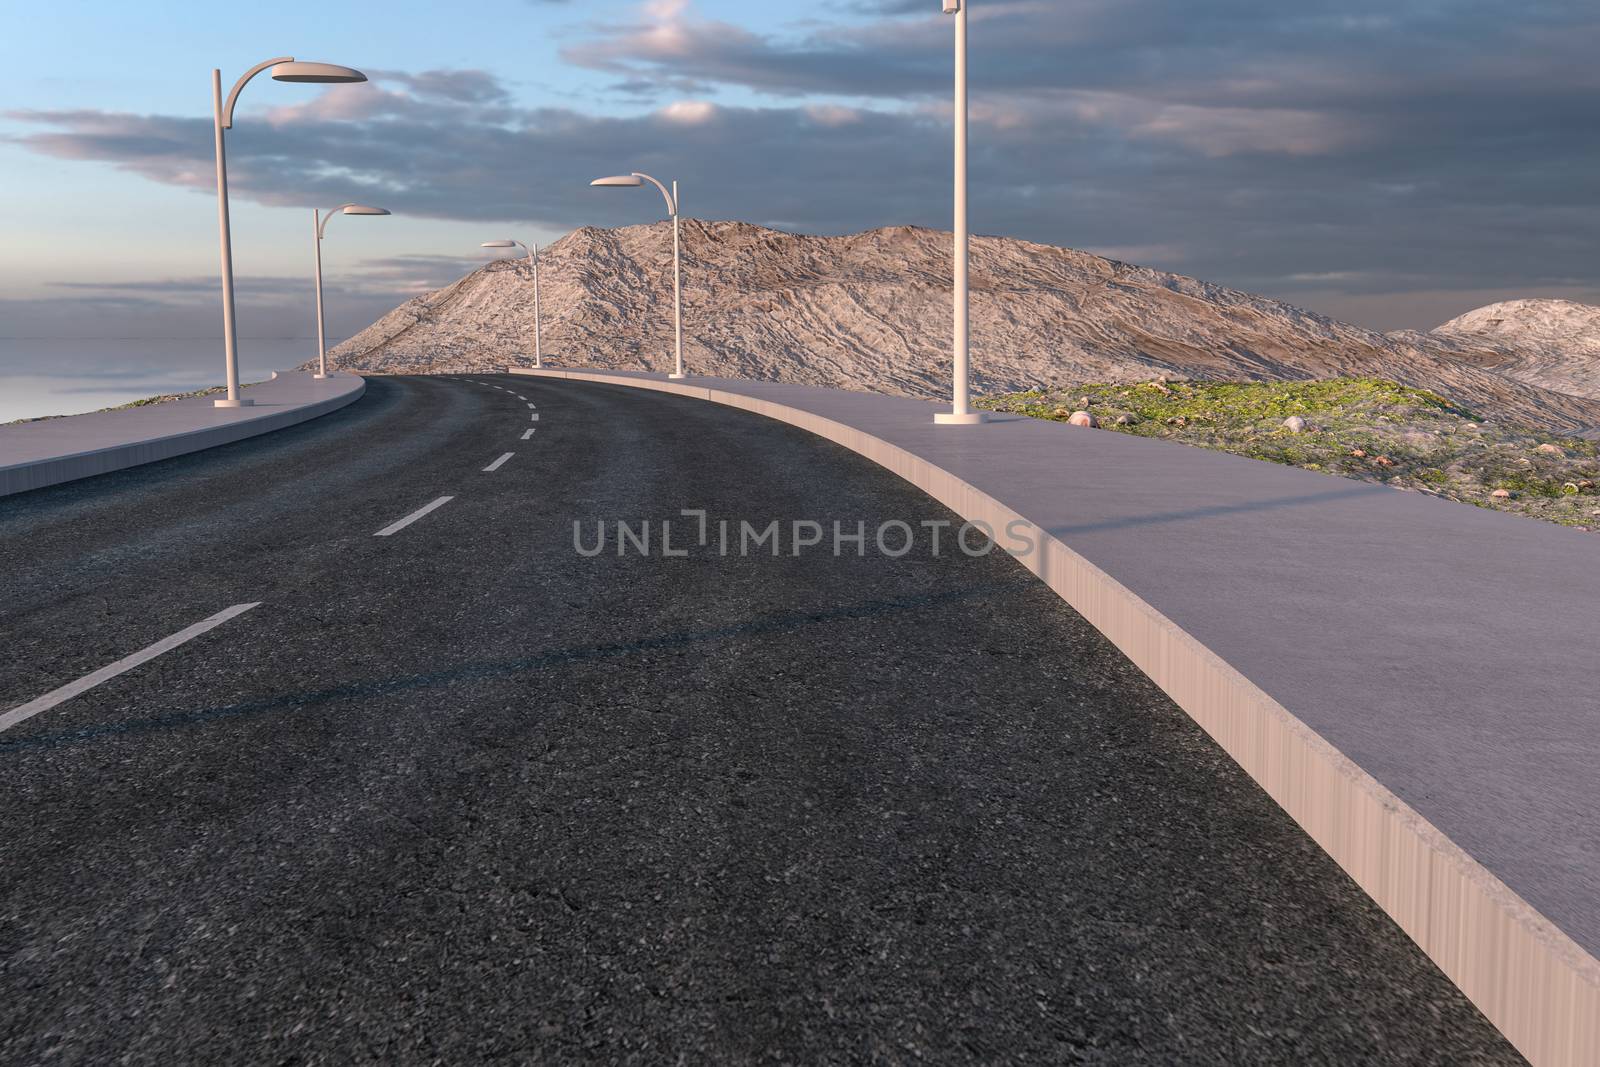 The waving road in the deserted suburbs, 3d rendering by vinkfan